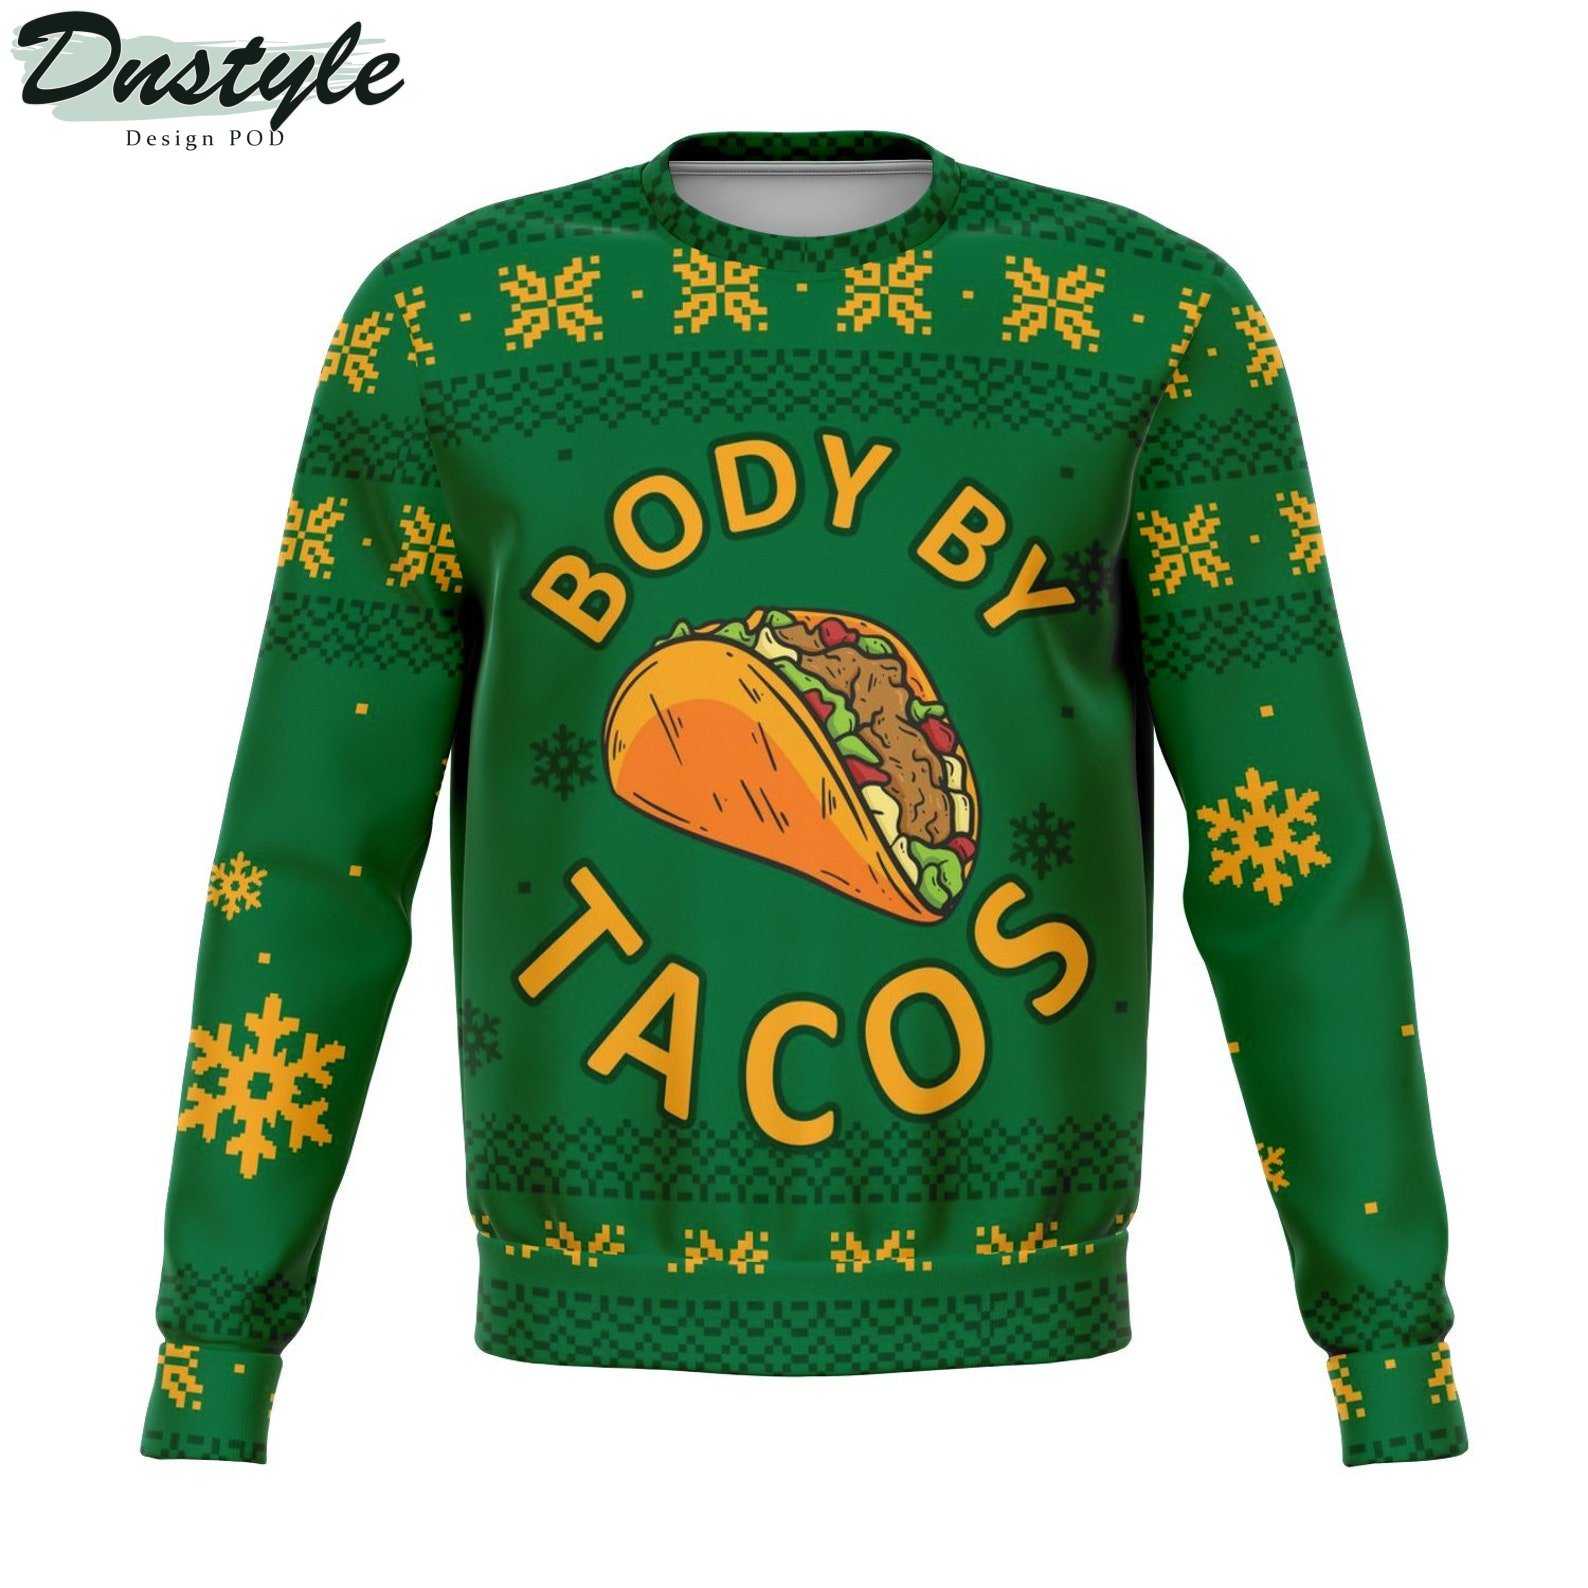 Body By Tacos 2022 Ugly Christmas Sweater